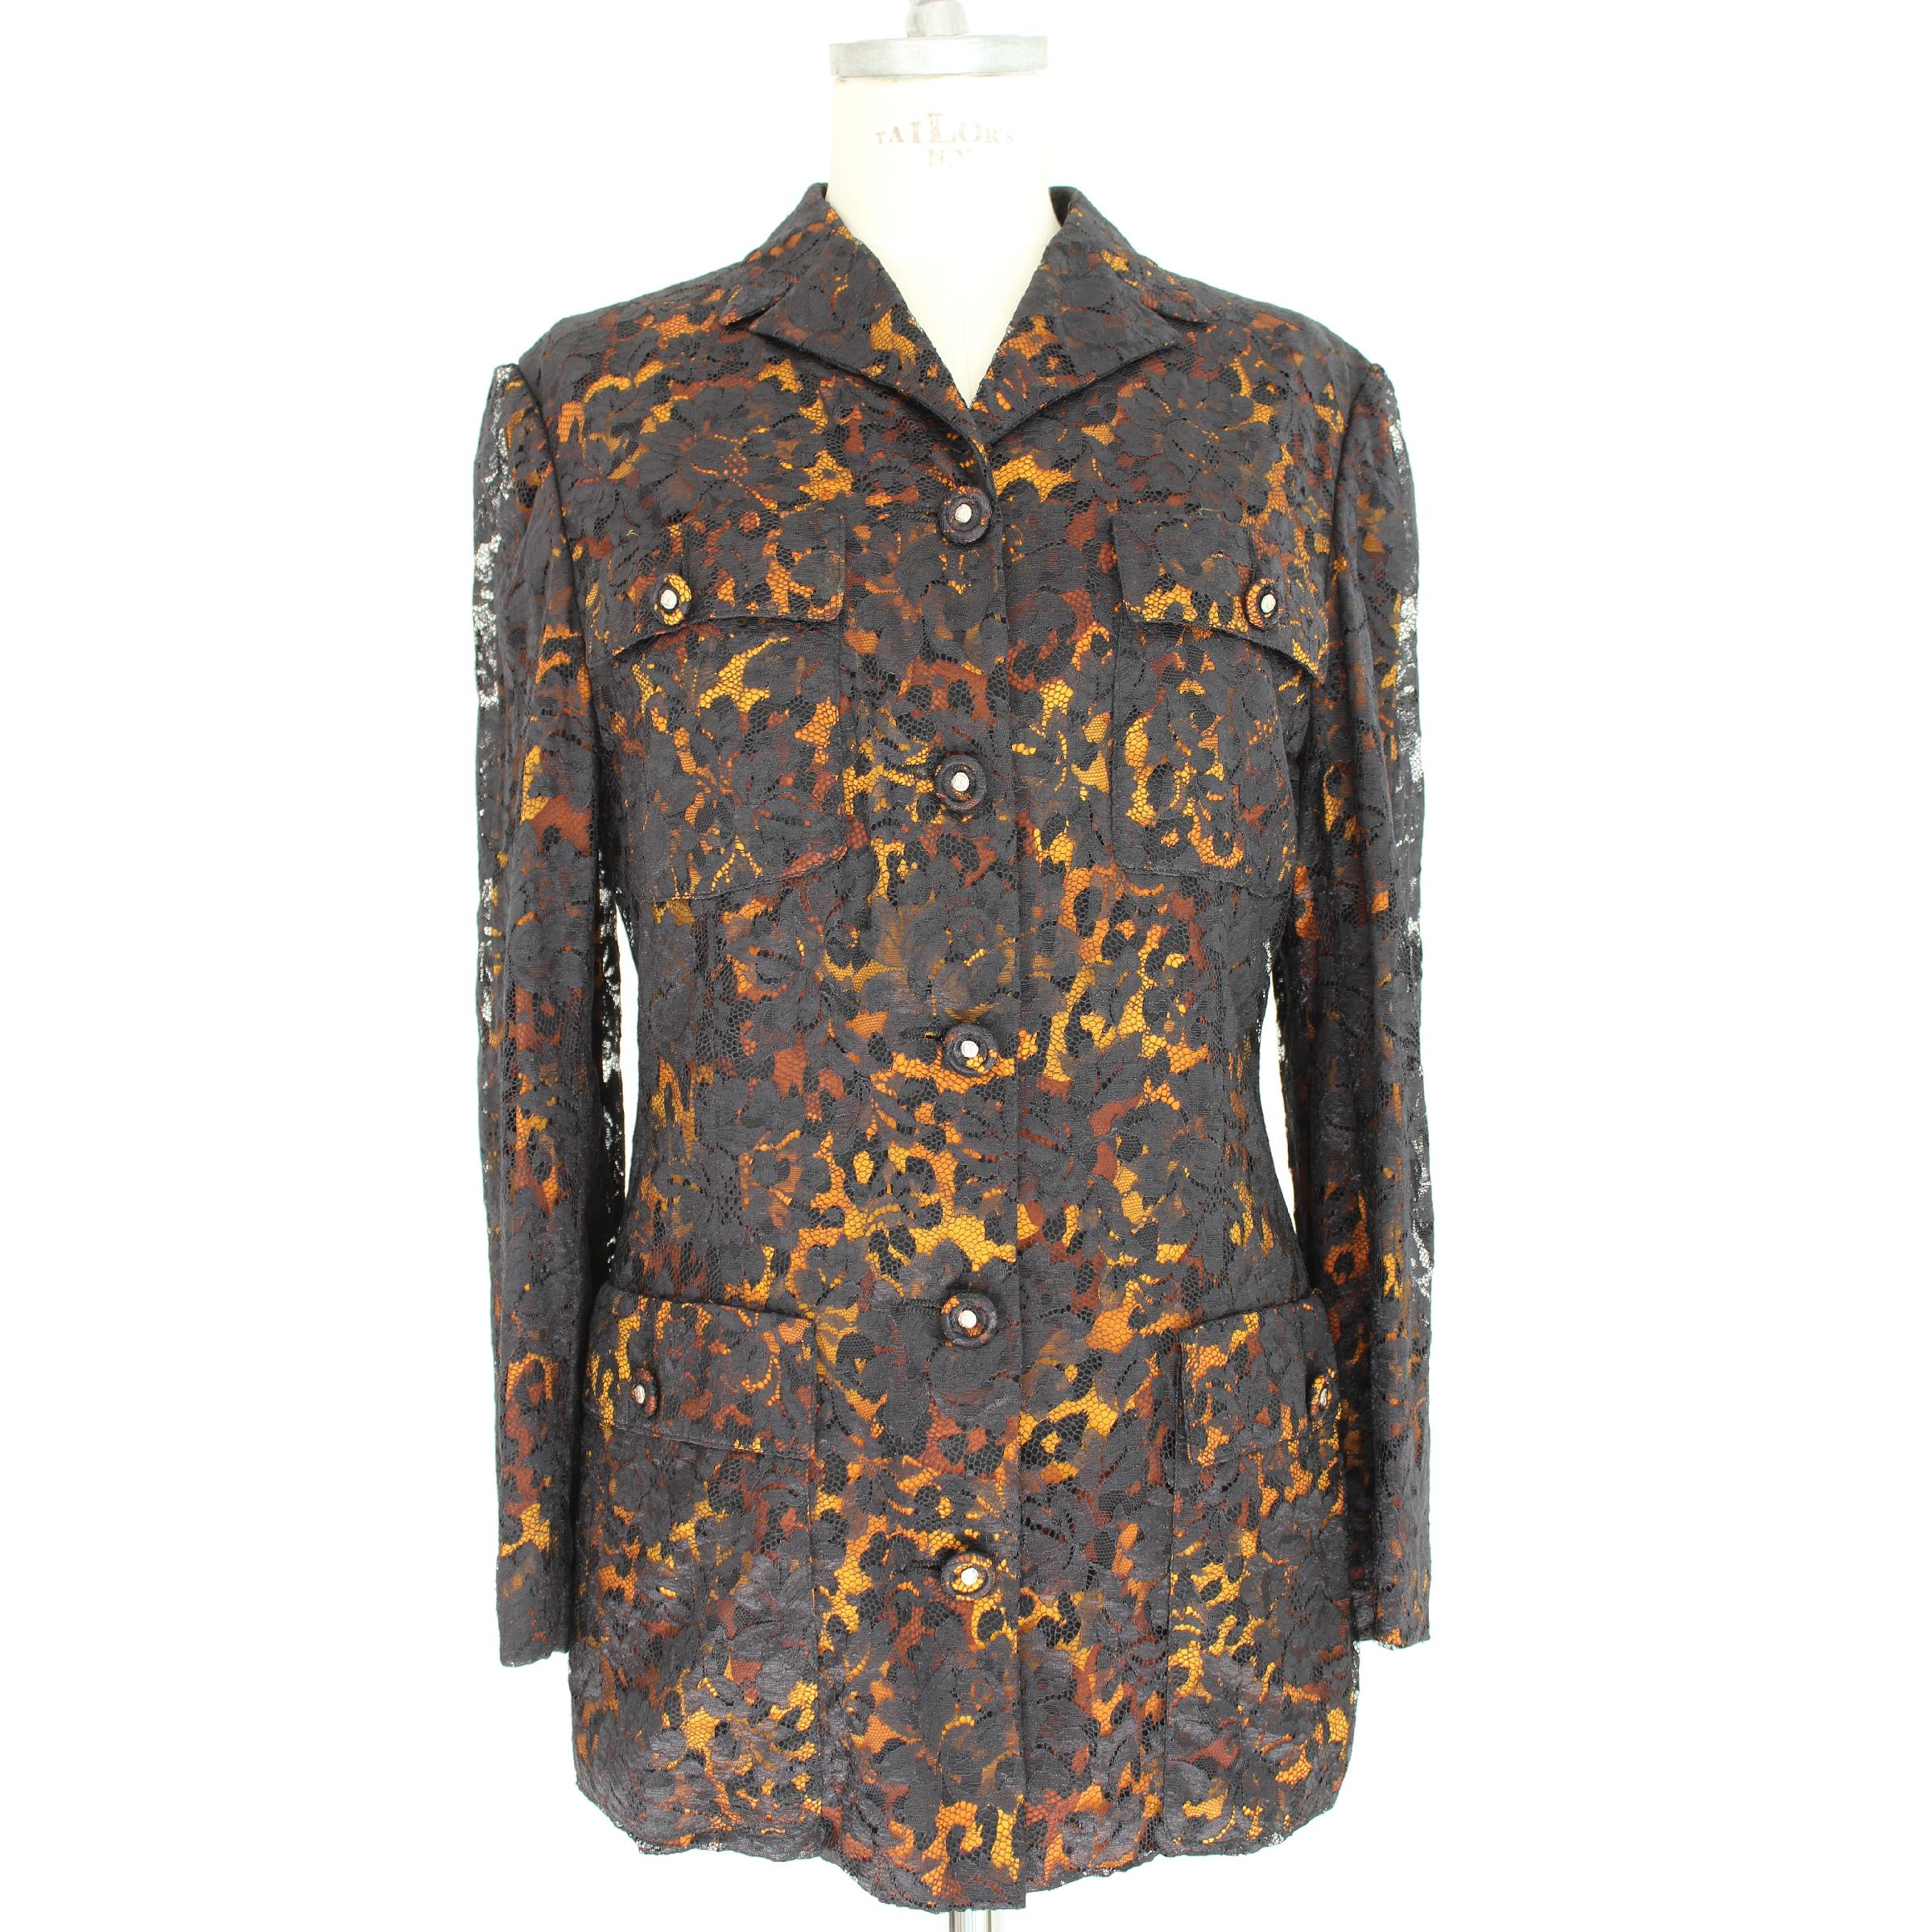 Istante by Gianni Versace vintage women's jacket, 53% Silk 47% polyamide. Exterior in black lace with floral designs, leopard print interior, 1980s. Made in Italy. Excellent vintage conditions.

Size: 44 It 10 Us 12 Uk

Shoulder: 44 cm
Bust / Chest: